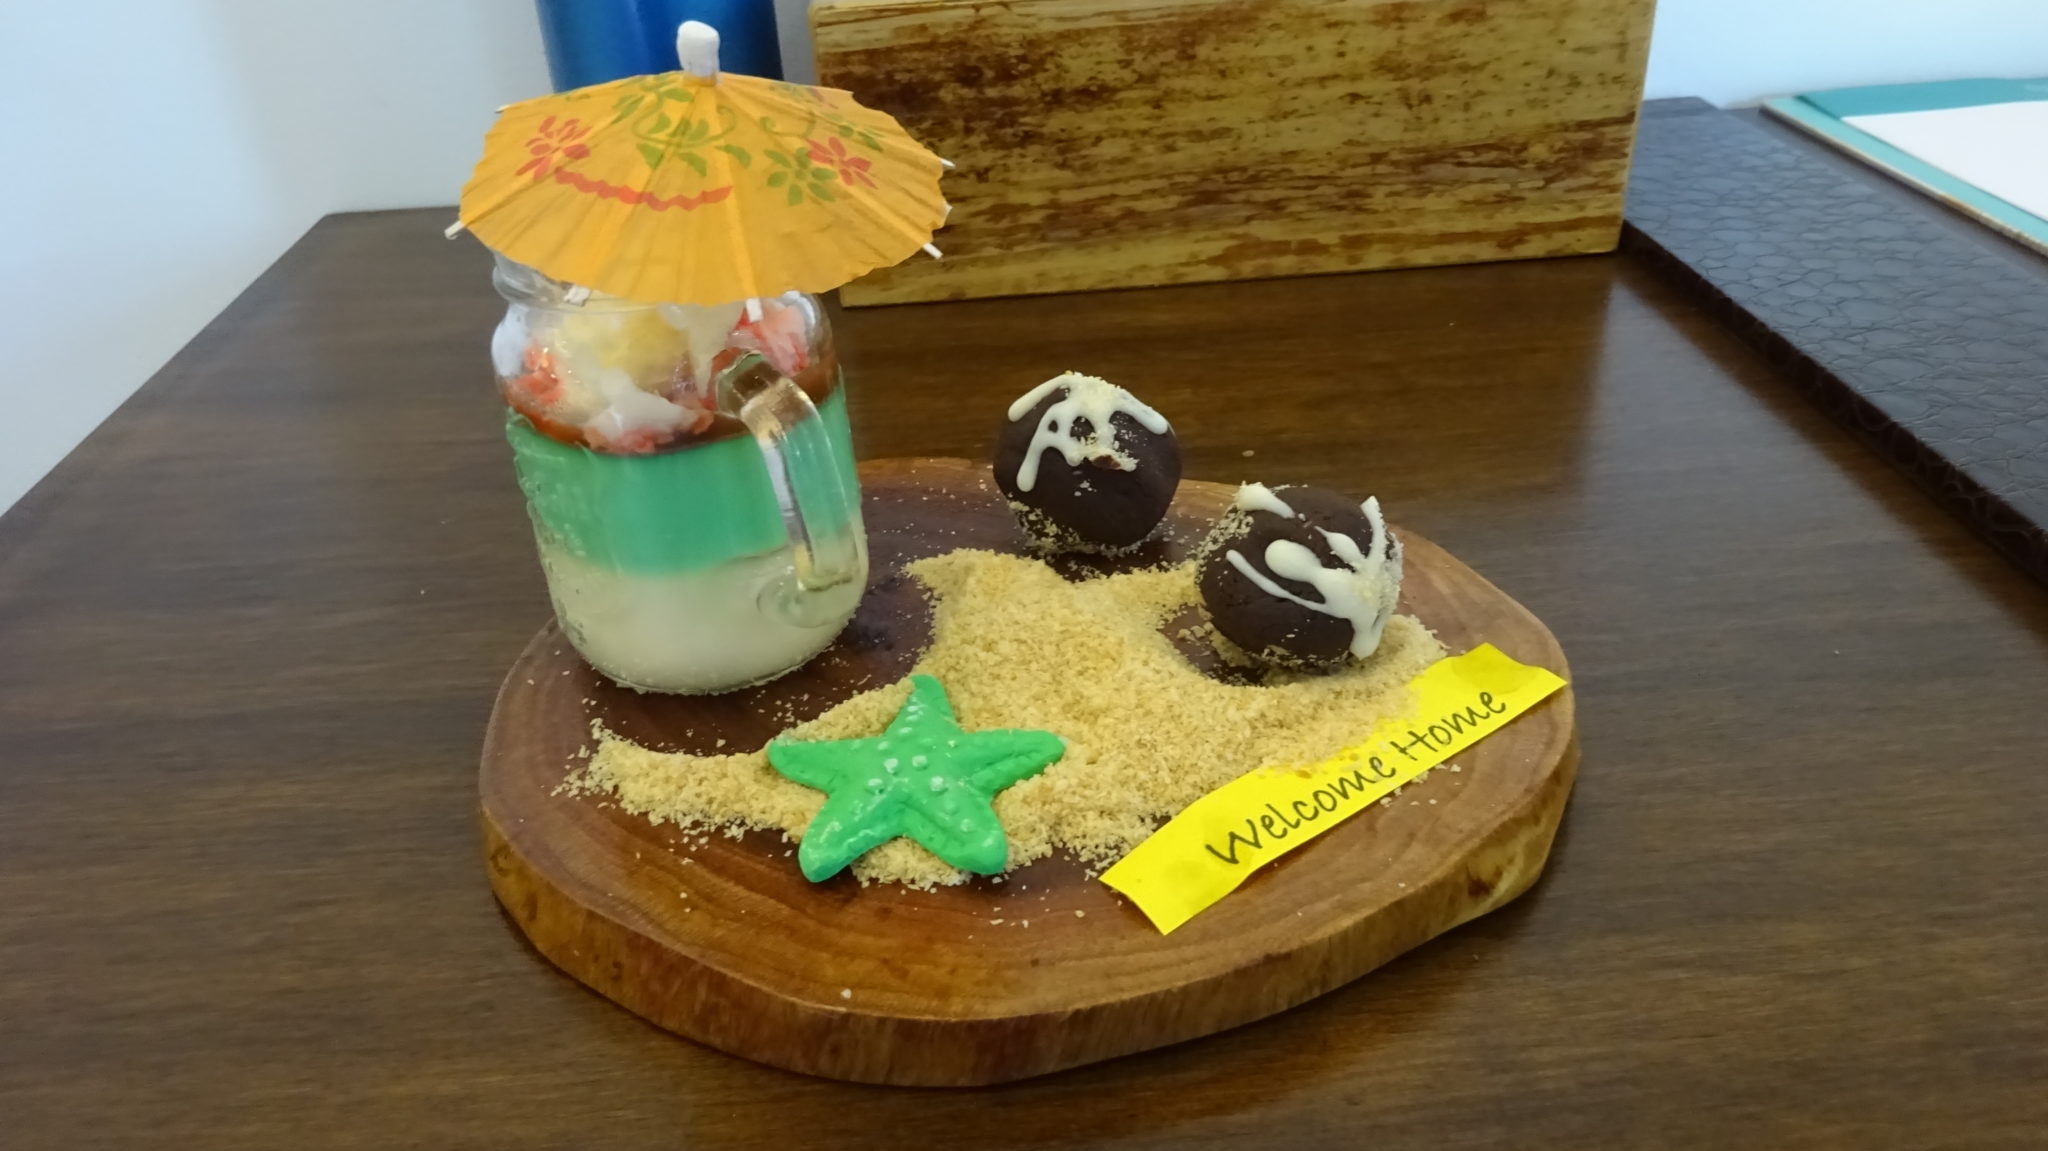 a panna cotta style dessert in a glass jar and 2 chocolate rum balls and sweet sand with 'Welcome Home' written on a piece of yellow paper